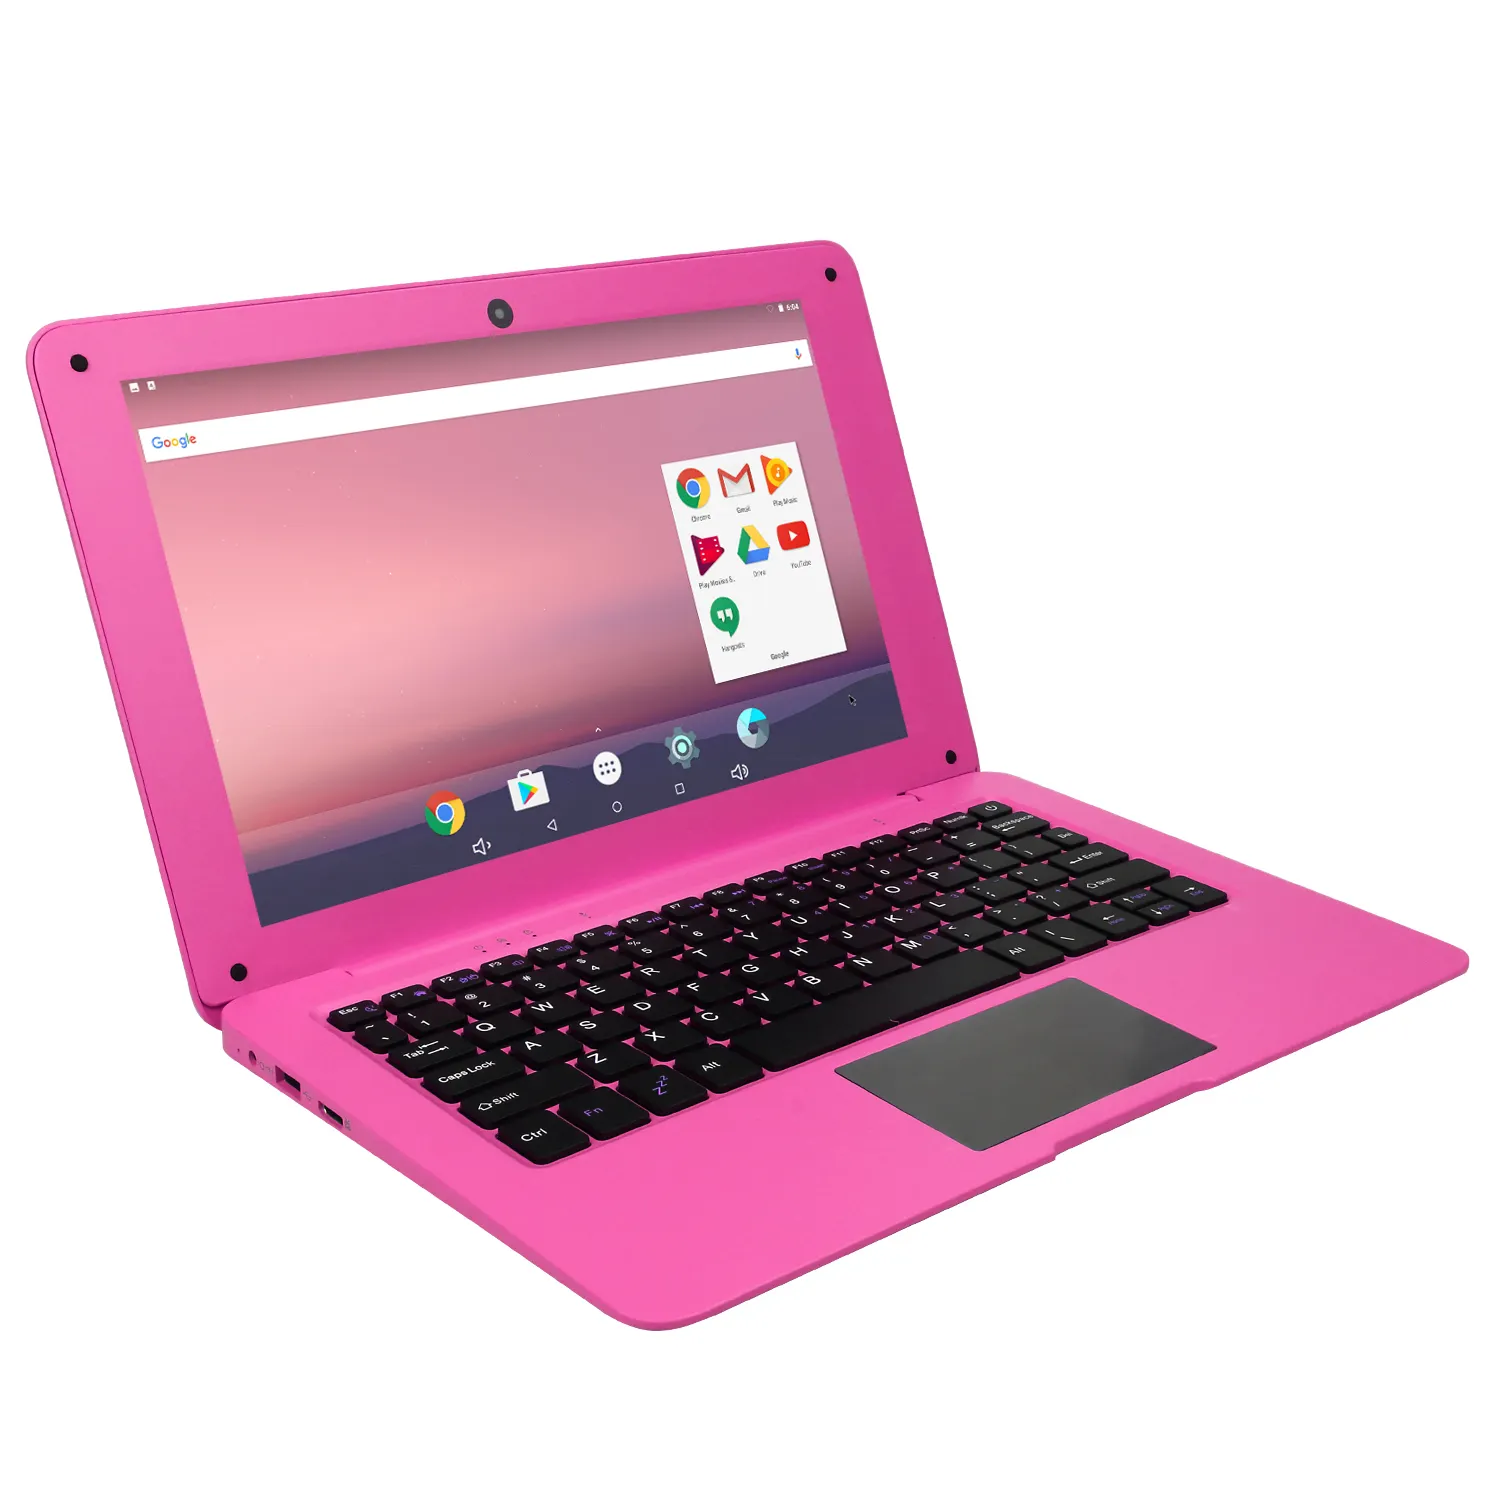 Students Android WIFI 32GB Mini 10.1inch Quad Core Notebook Laptops